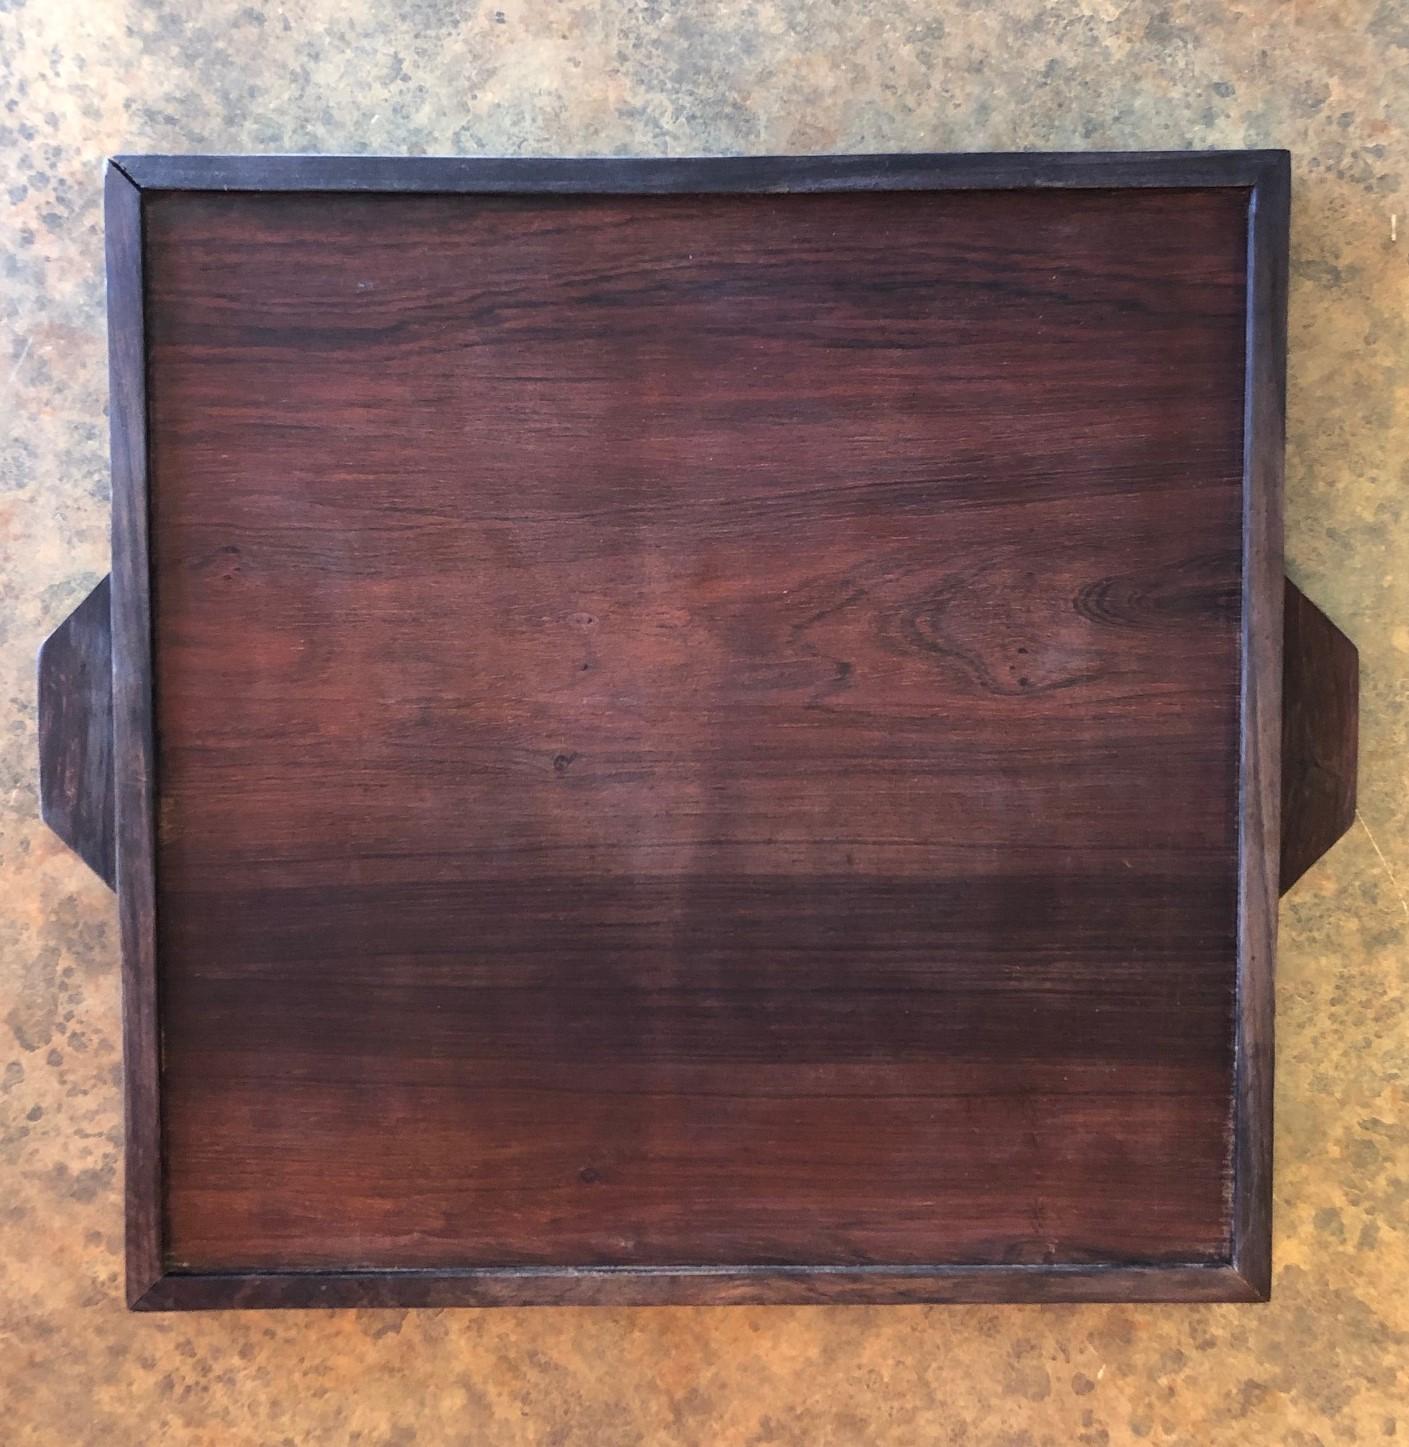 Walnut and Ceramic Tile Scandinavian Tray with Handles In Good Condition For Sale In San Diego, CA